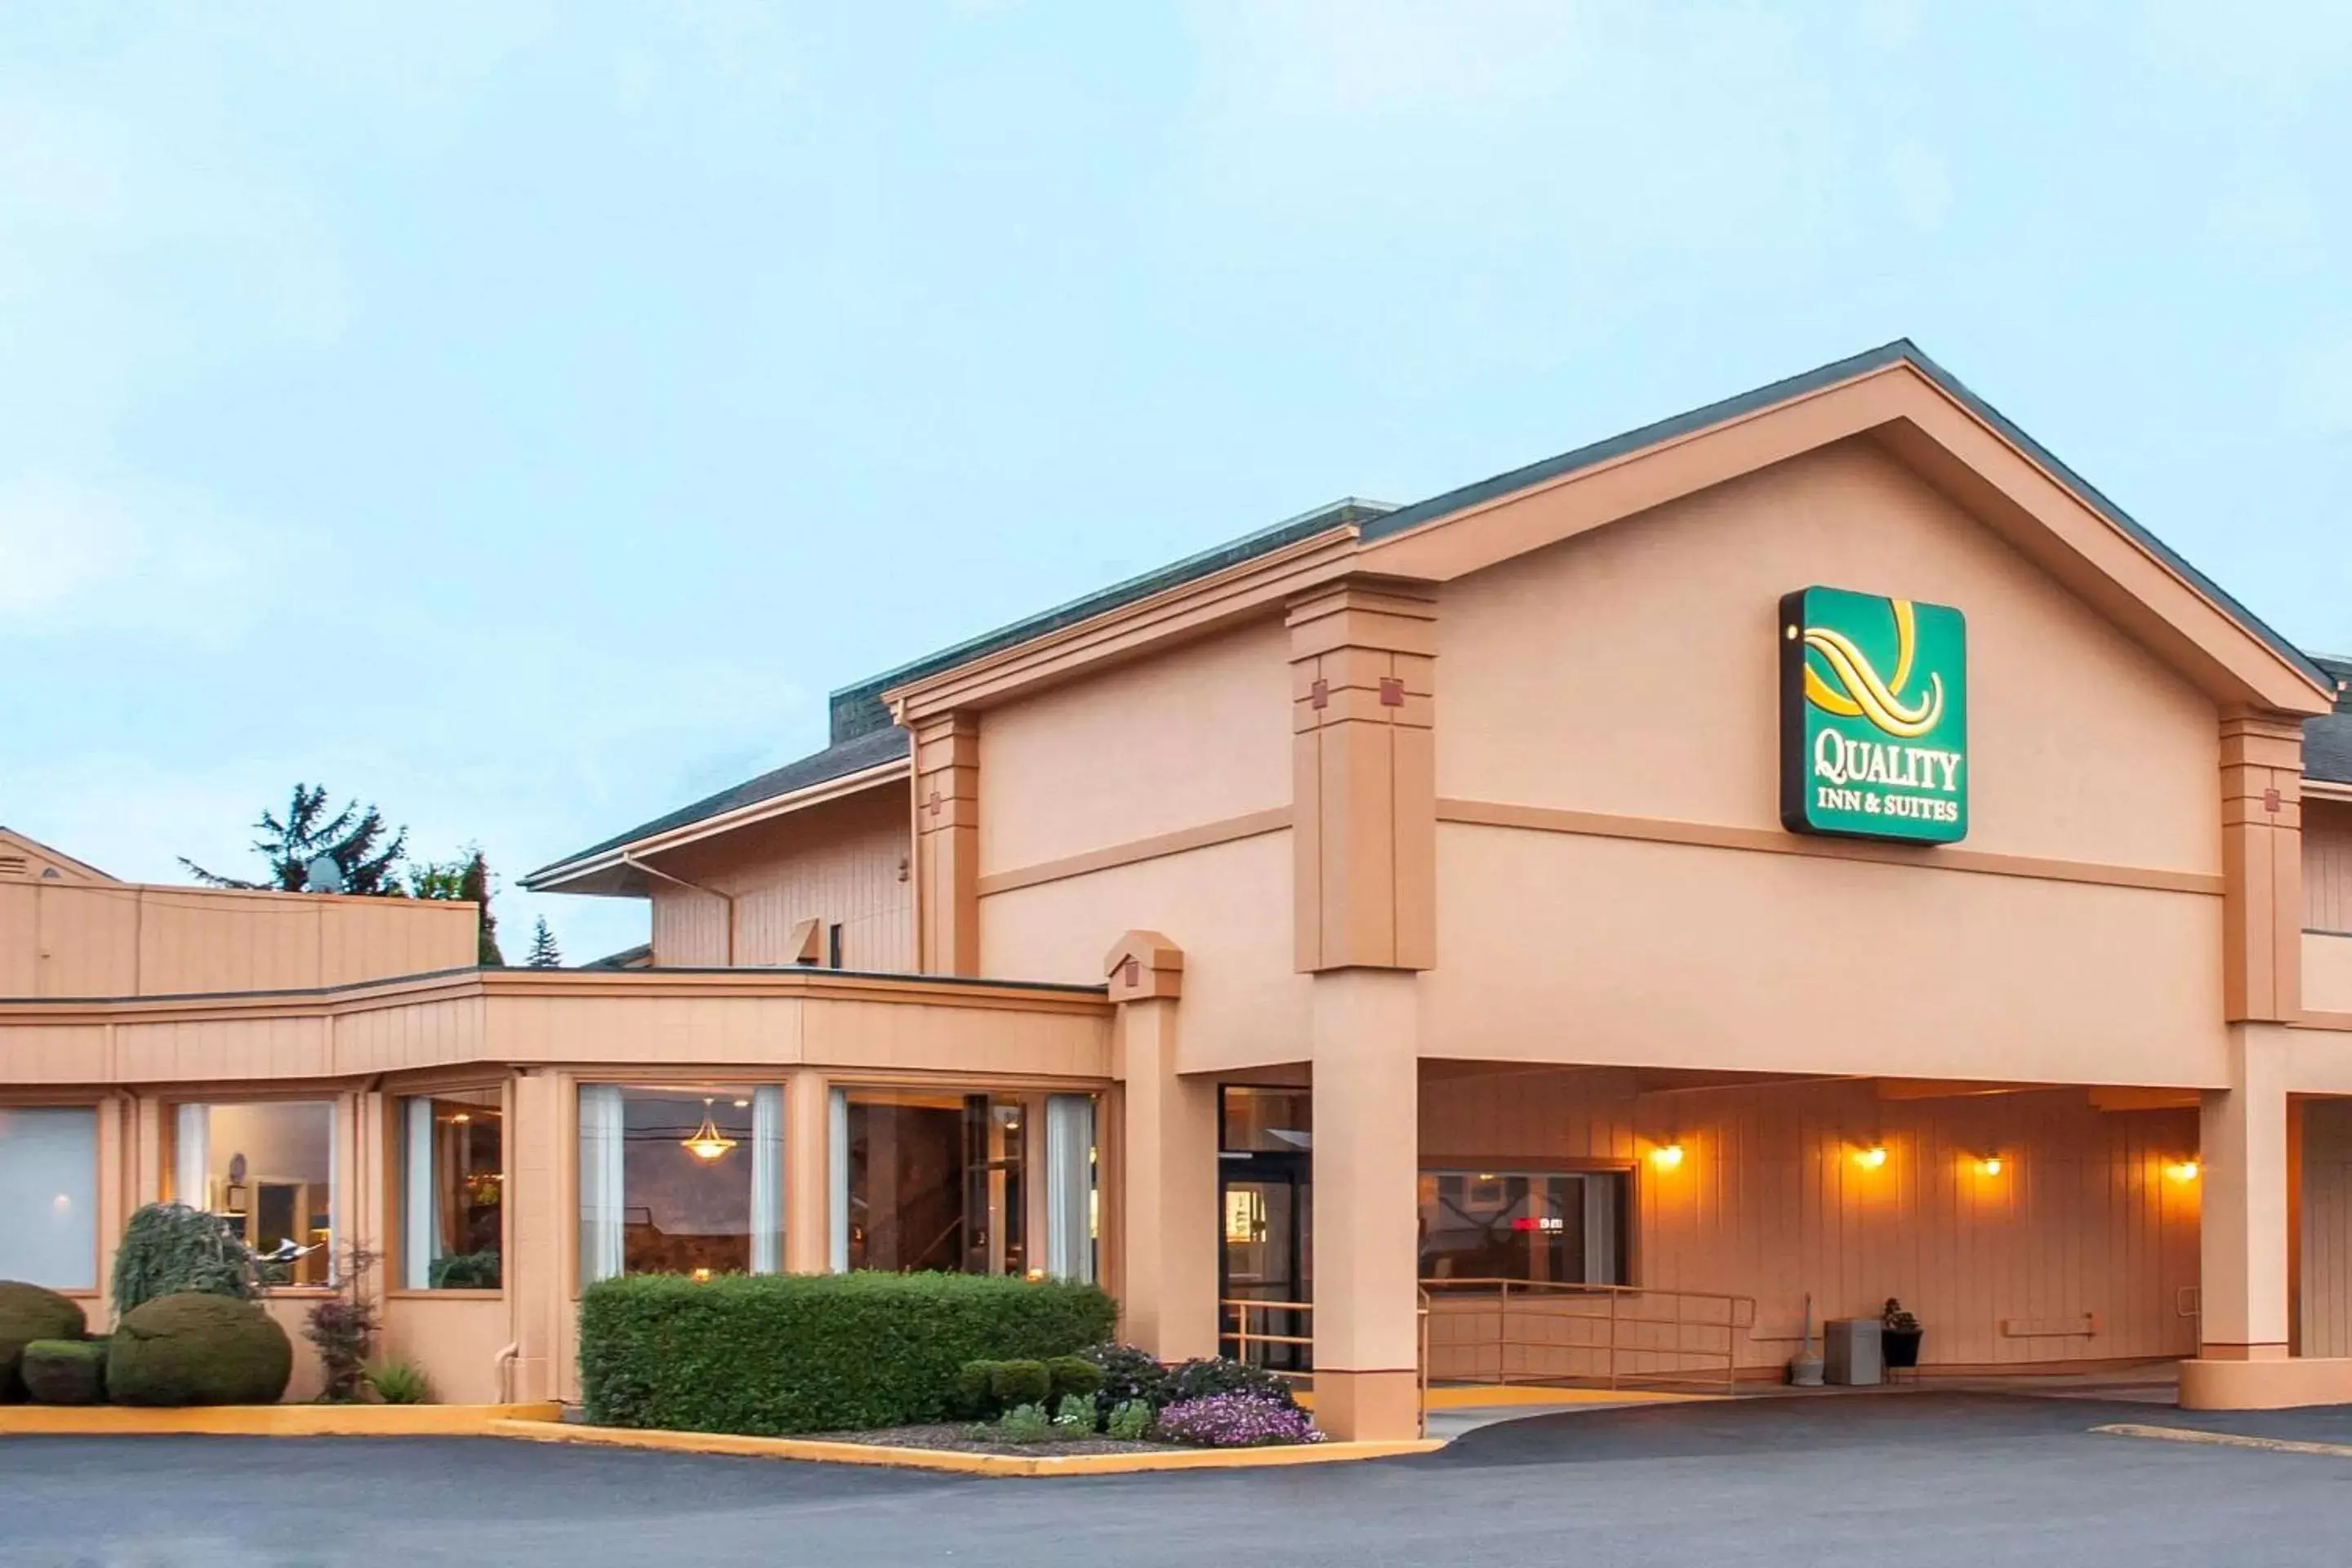 Property building in Quality Inn & Suites at Coos Bay